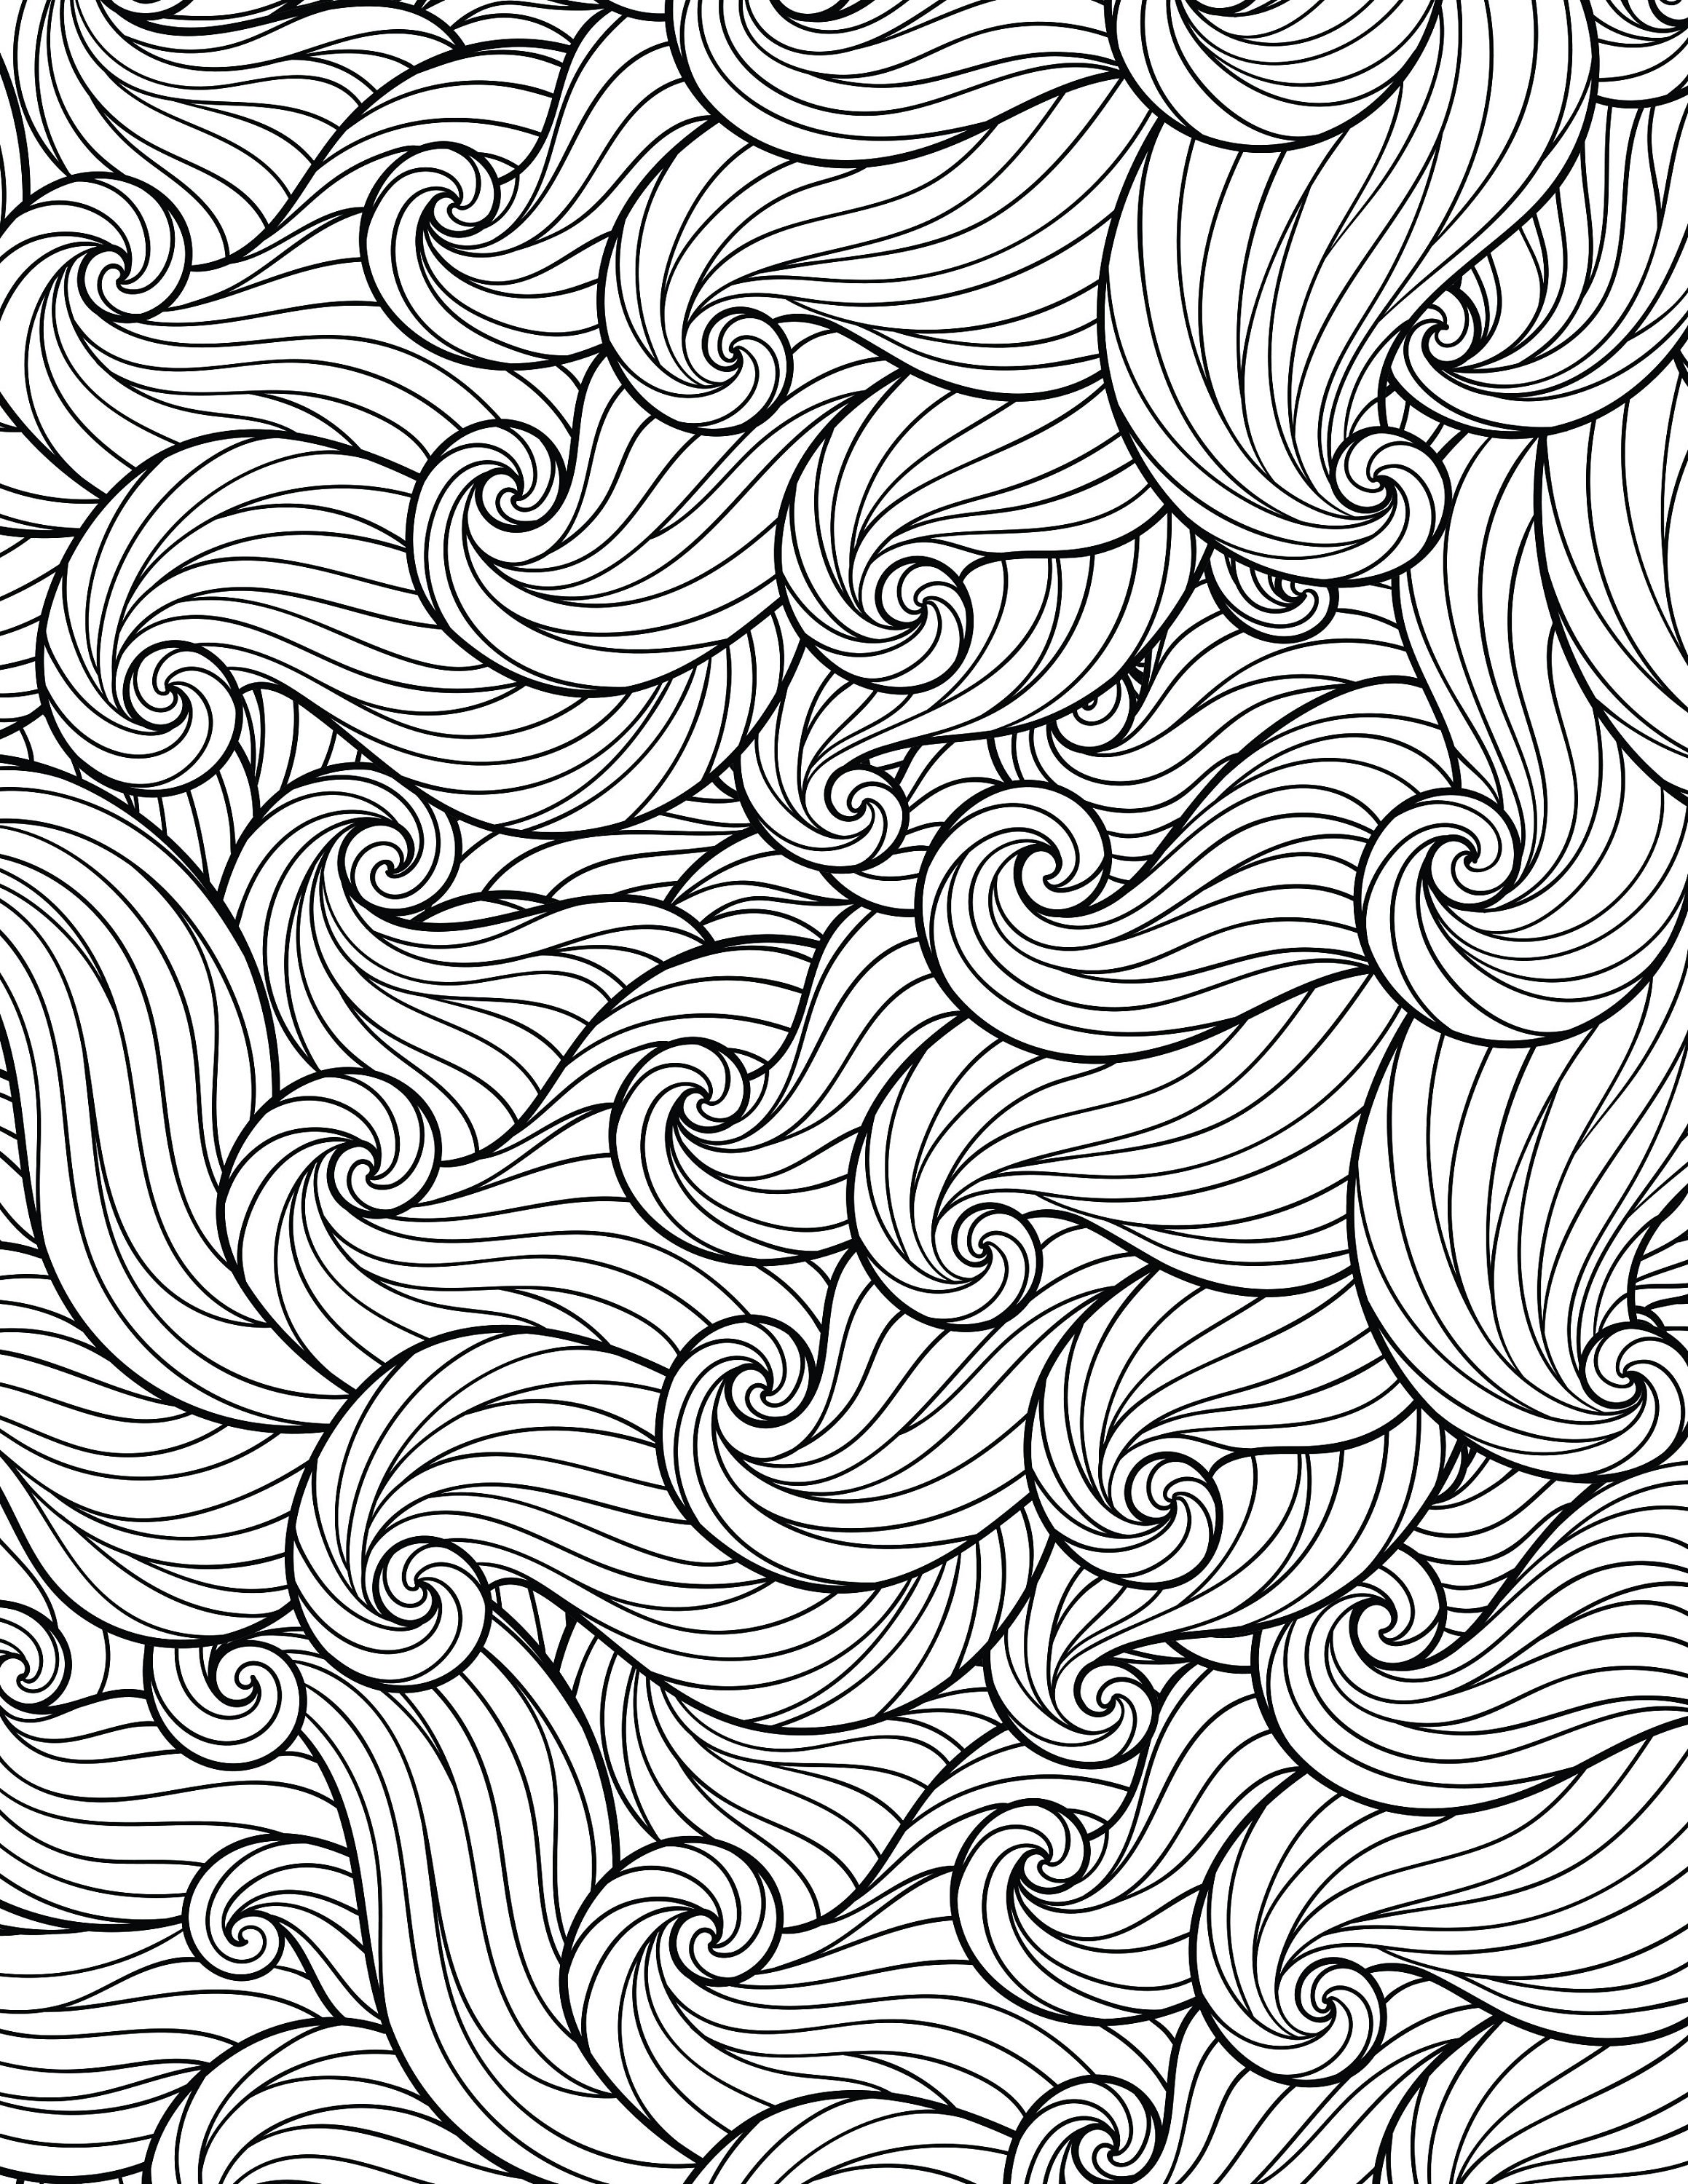 Twist Pages for Adults 3 Printable Coloring Pages Instant - Etsy